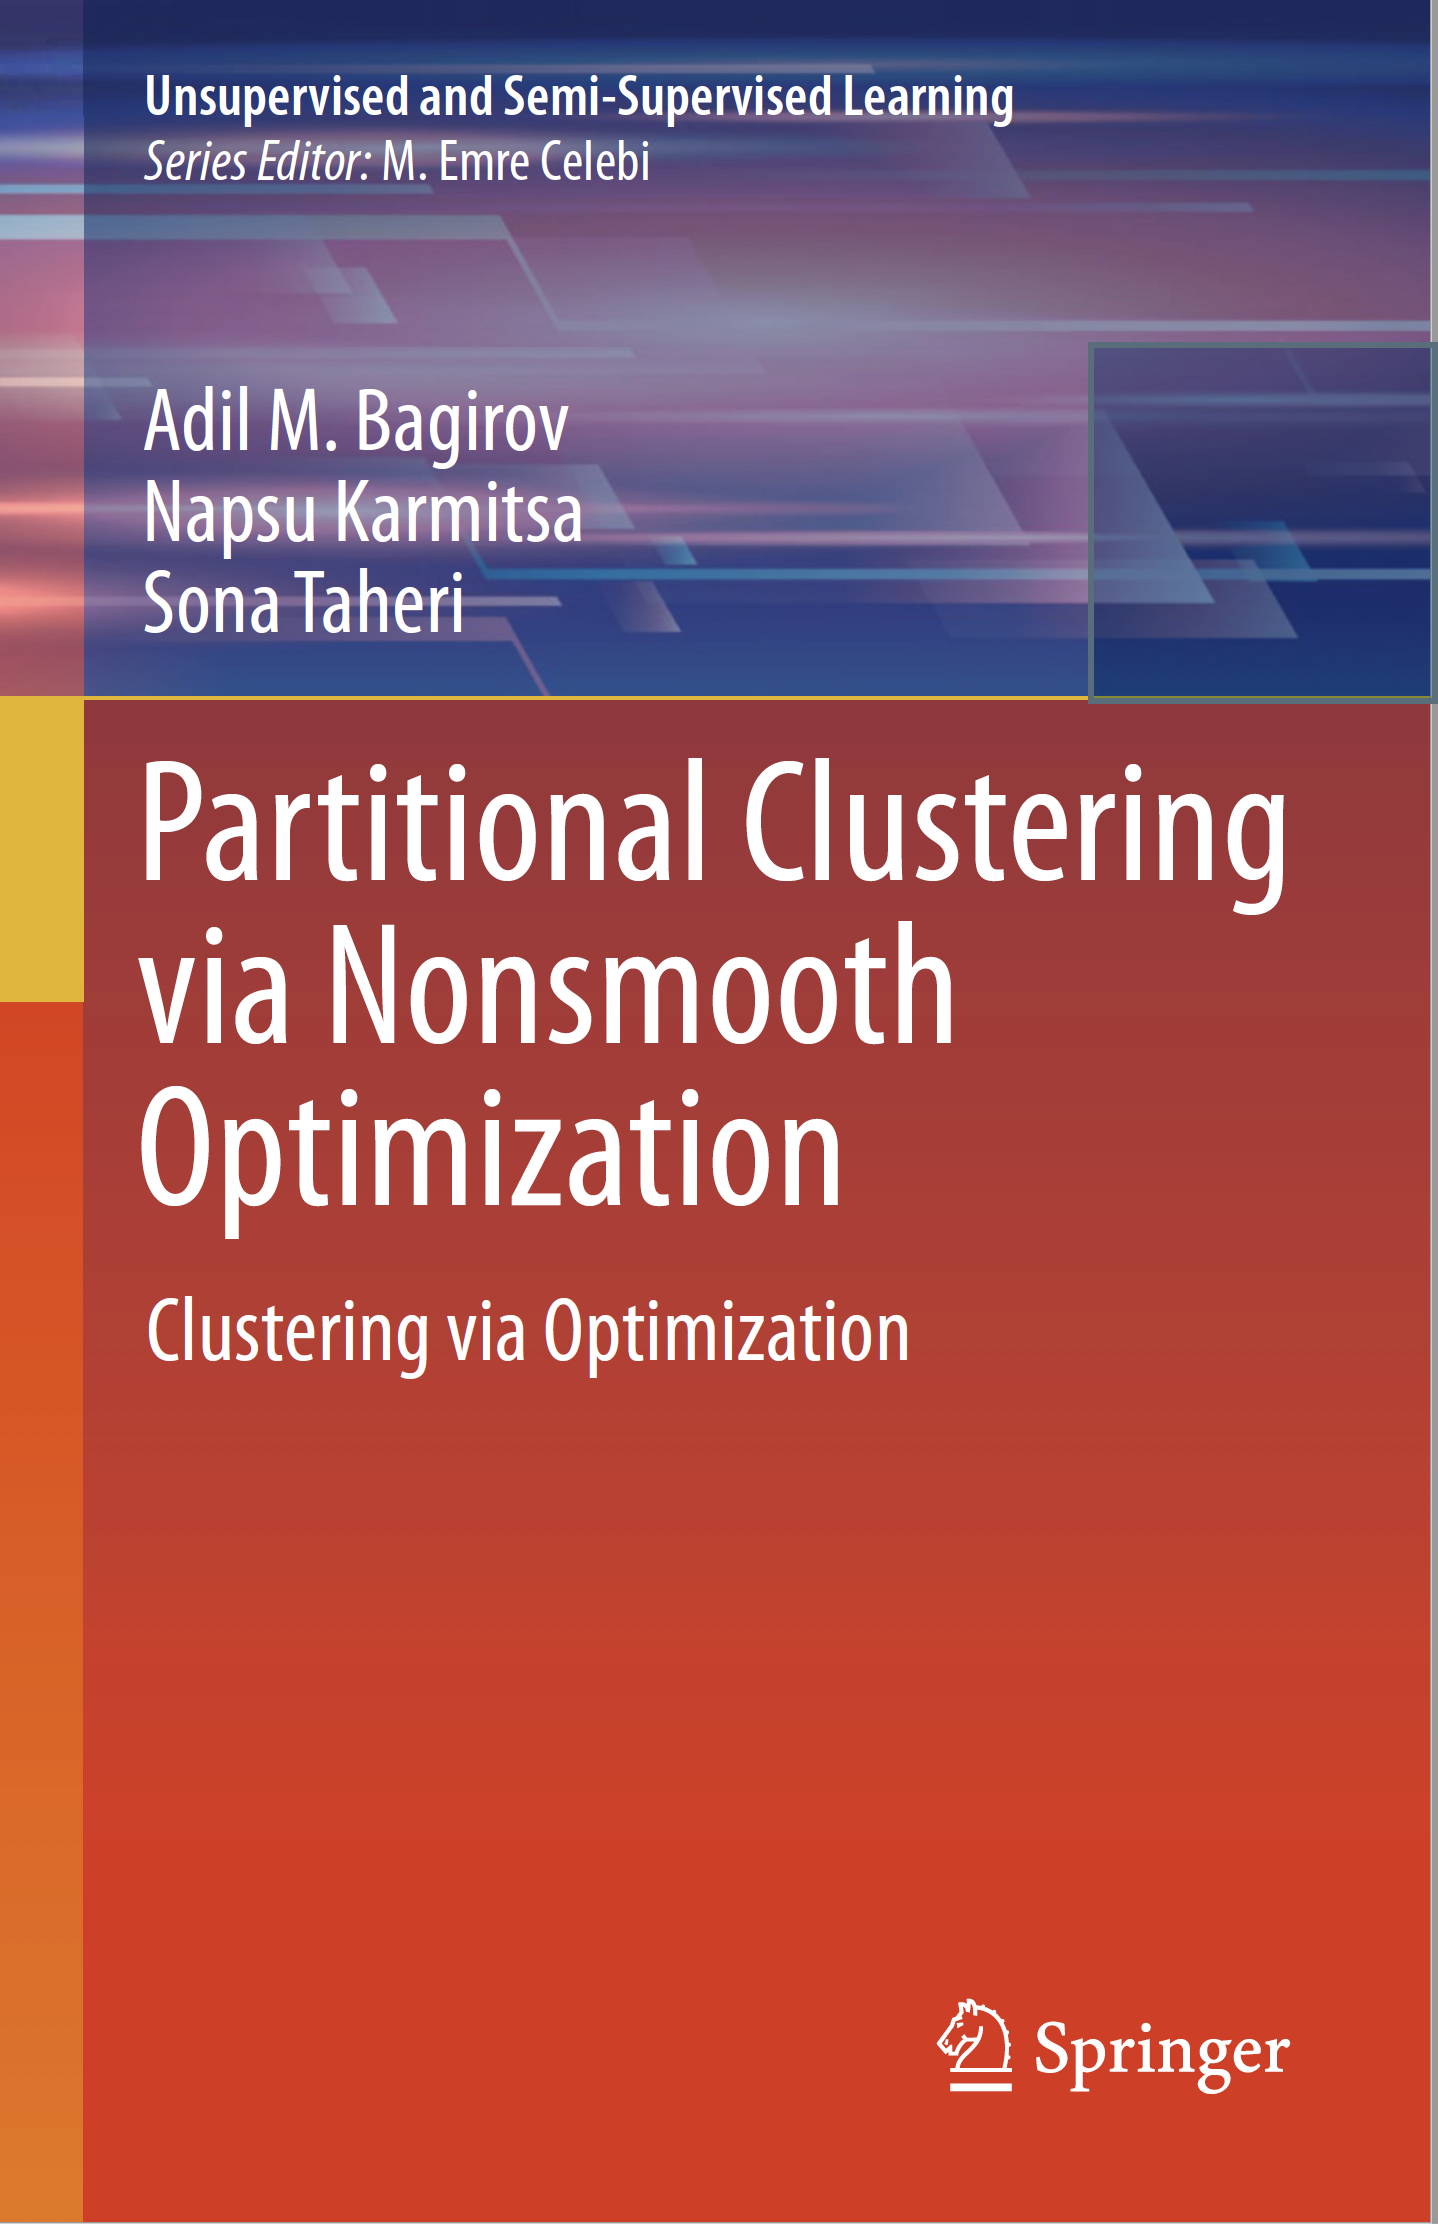 My book: Partional Clustering via Nonsmooth Optimization